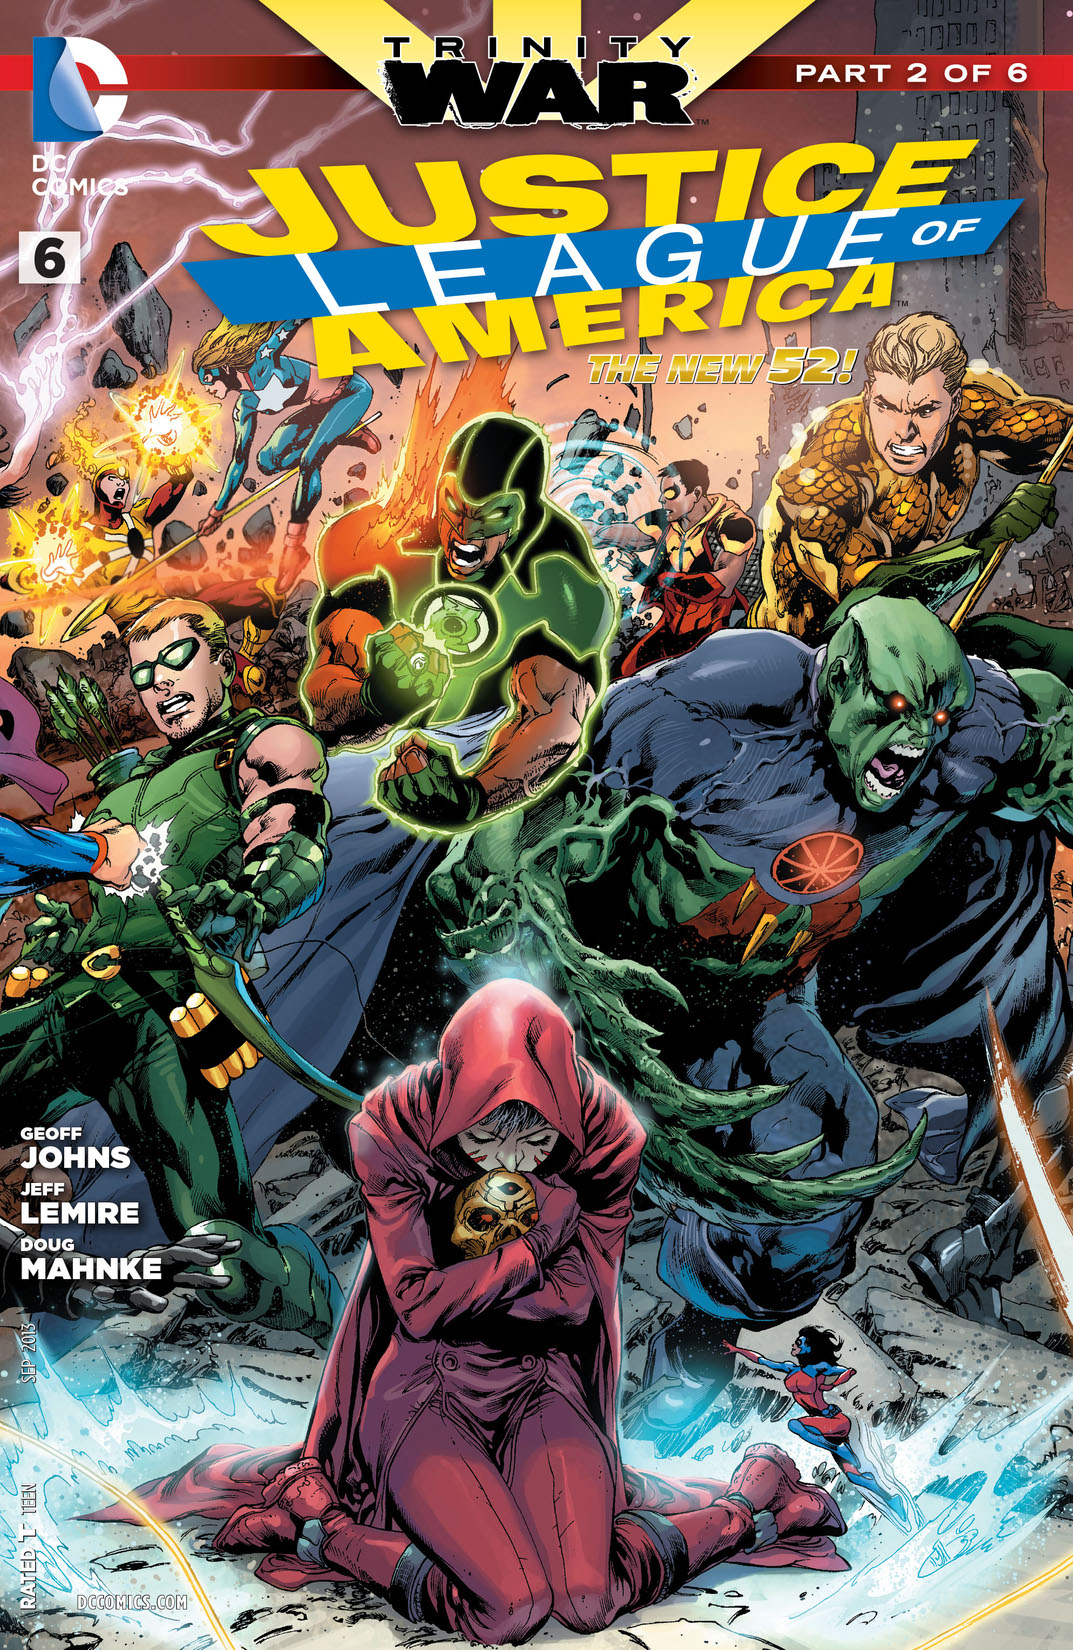 Justice League of America (2013-) #6 preview images